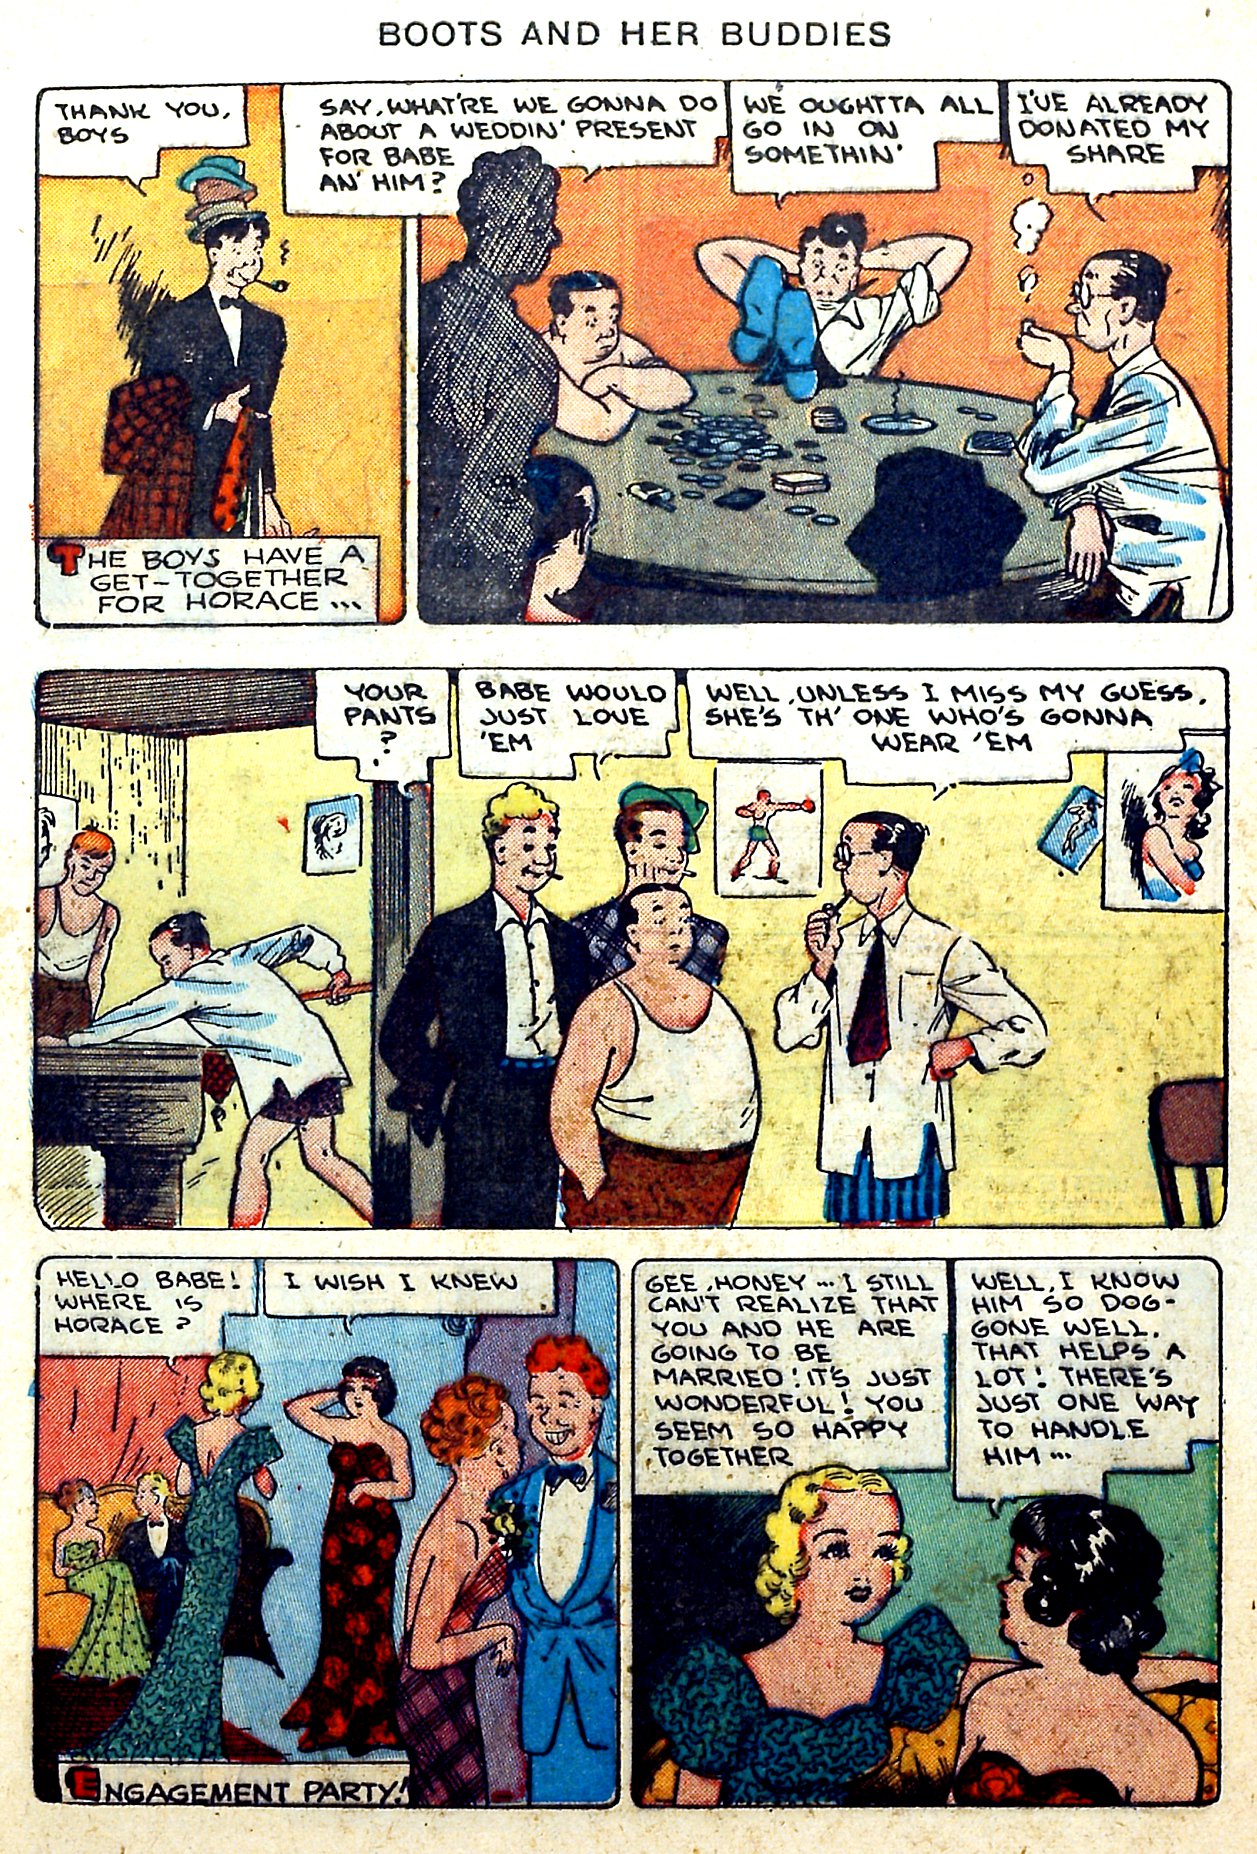 Read online Boots and Her Buddies (1948) comic -  Issue #5 - 9